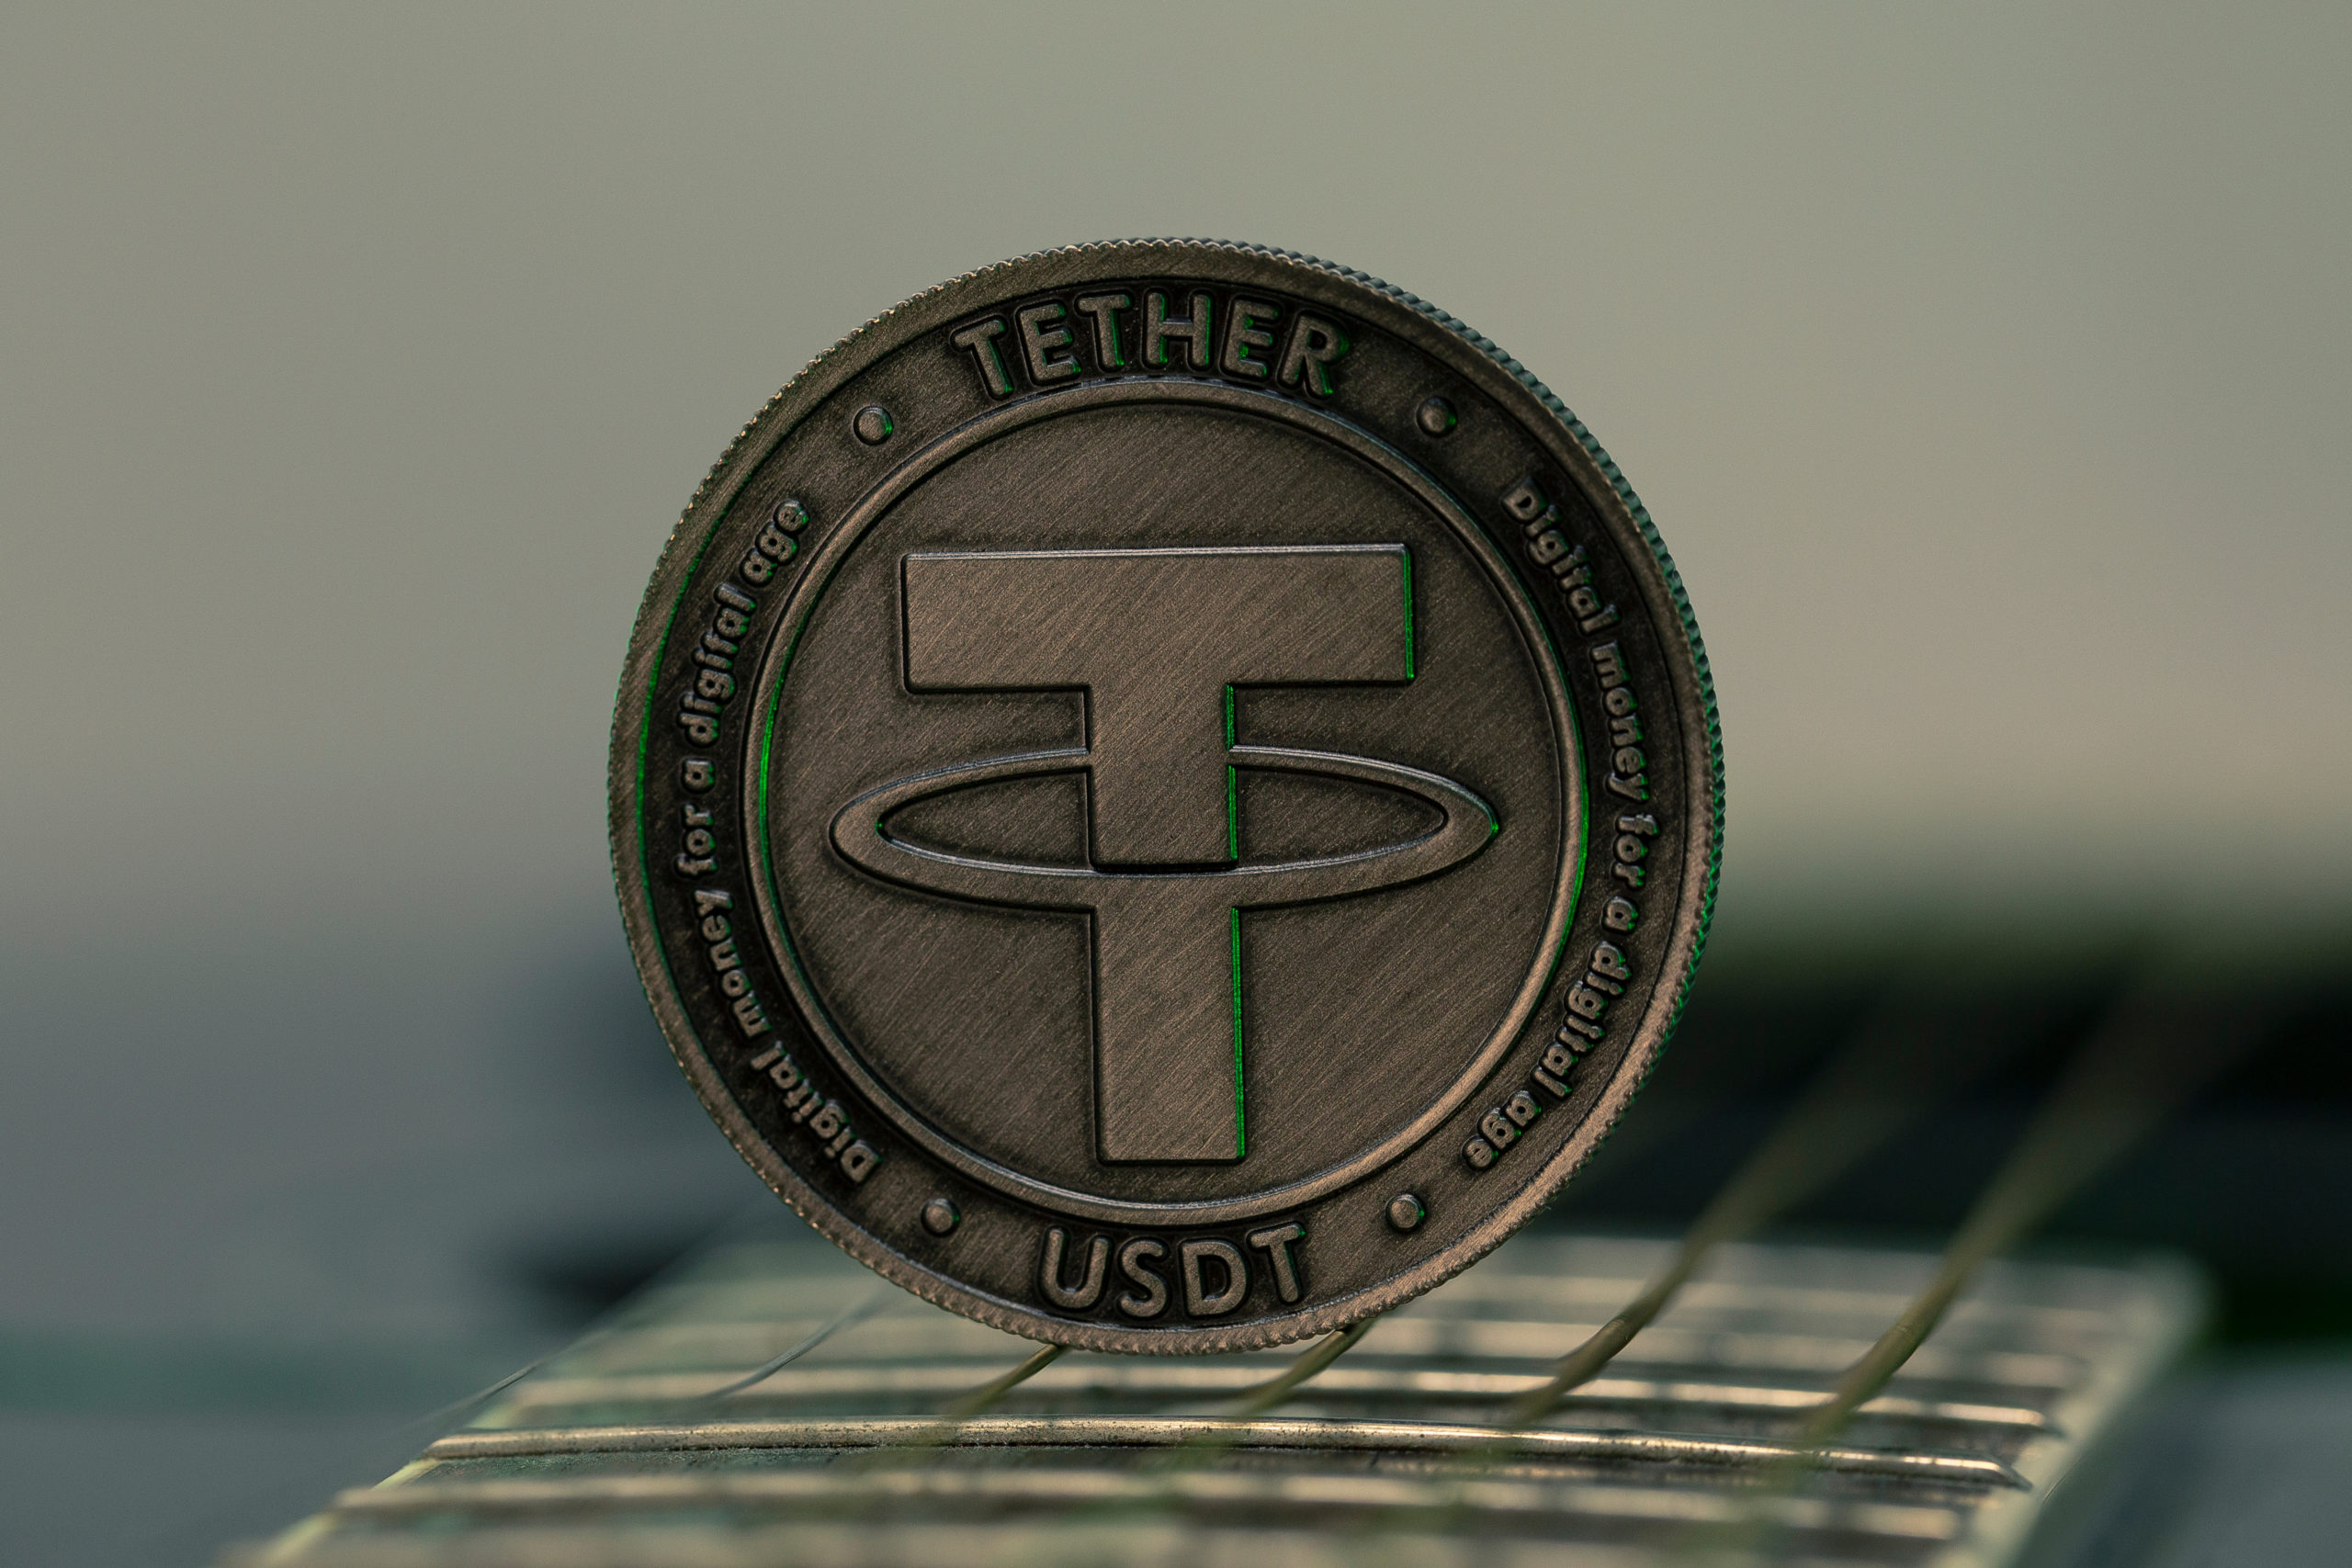 Tether reduces commercial paper holdings to improve quality of reserves